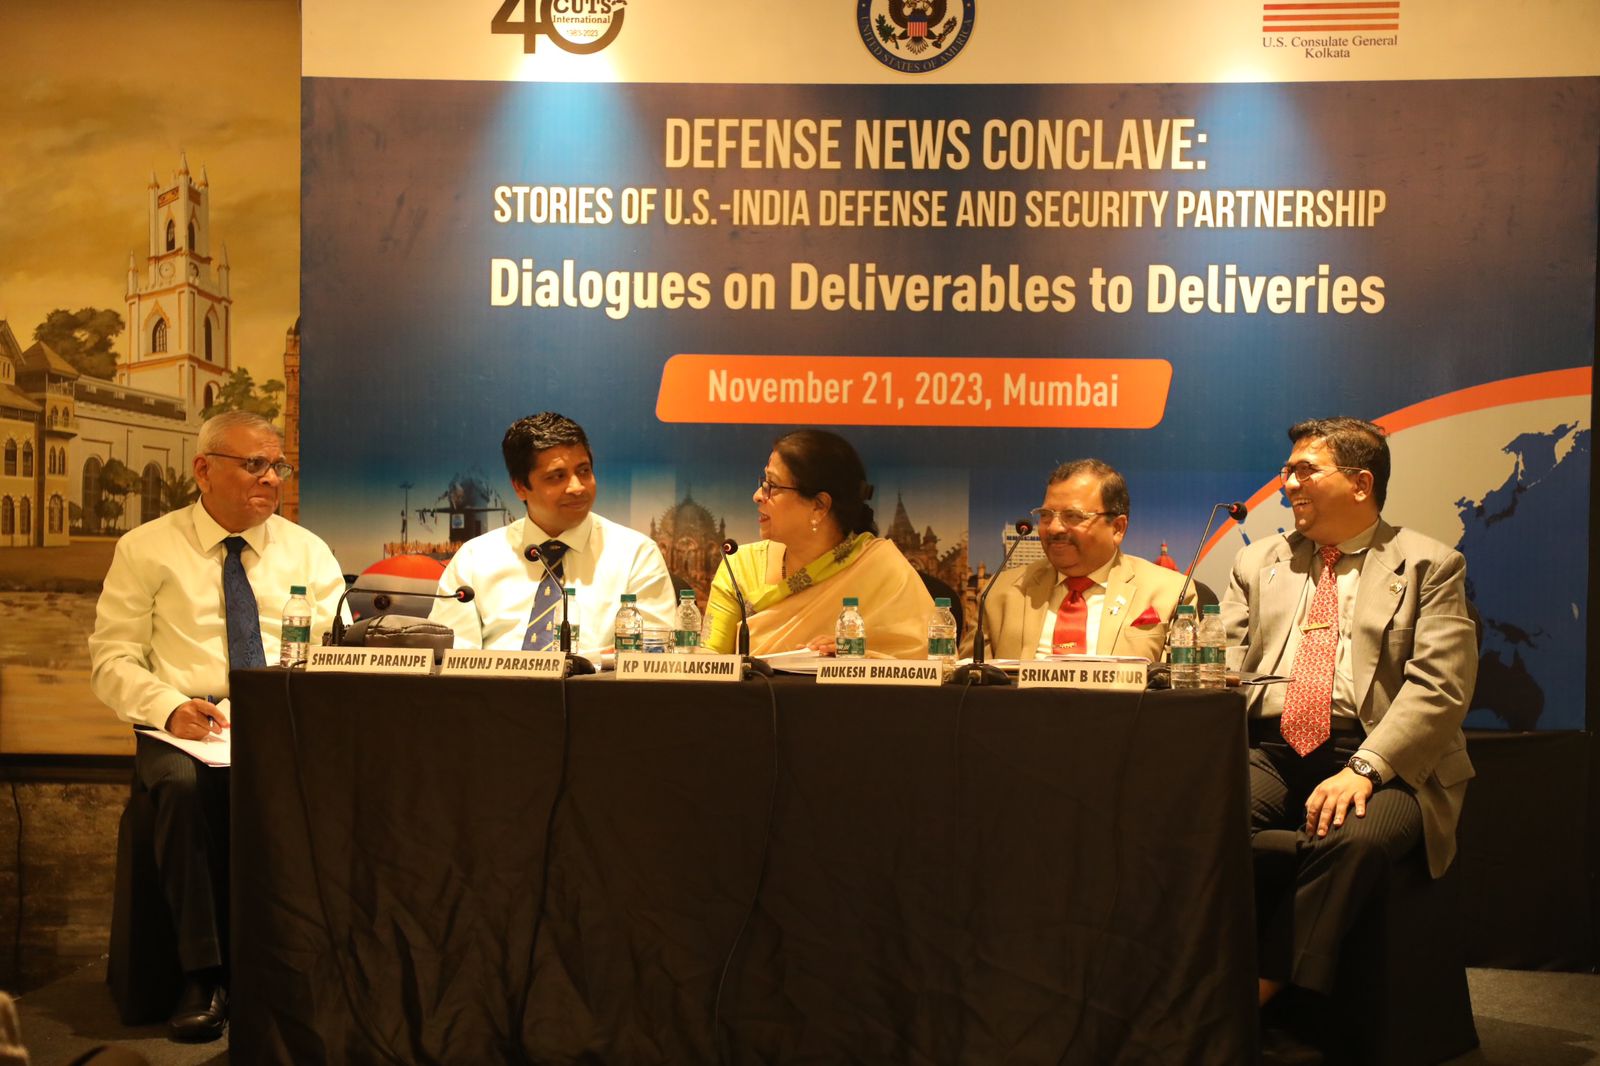 U.S.-India Defense Partnership is Now at an All-time High: U.S. Senior Défense Official